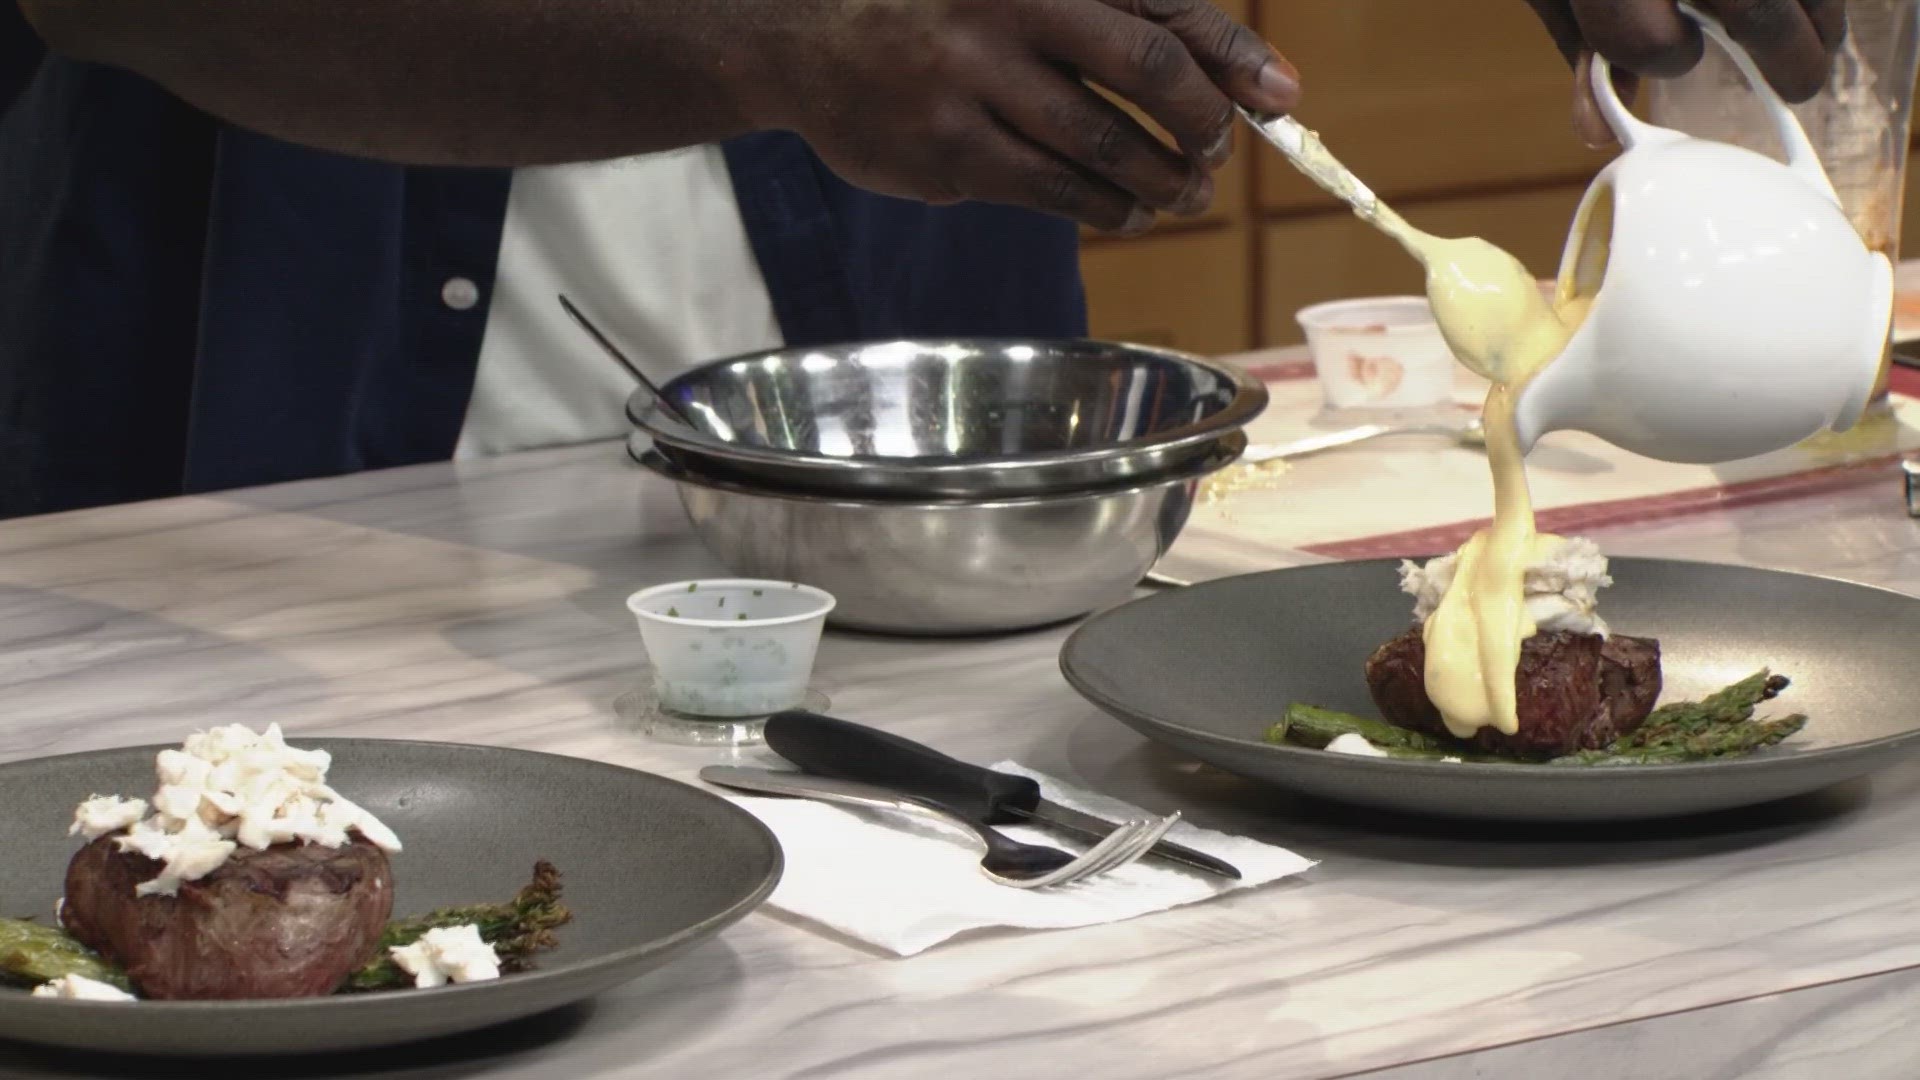 Chef Eric Wells visited 3News to show how to make a Steak Oscar for Father's Day.